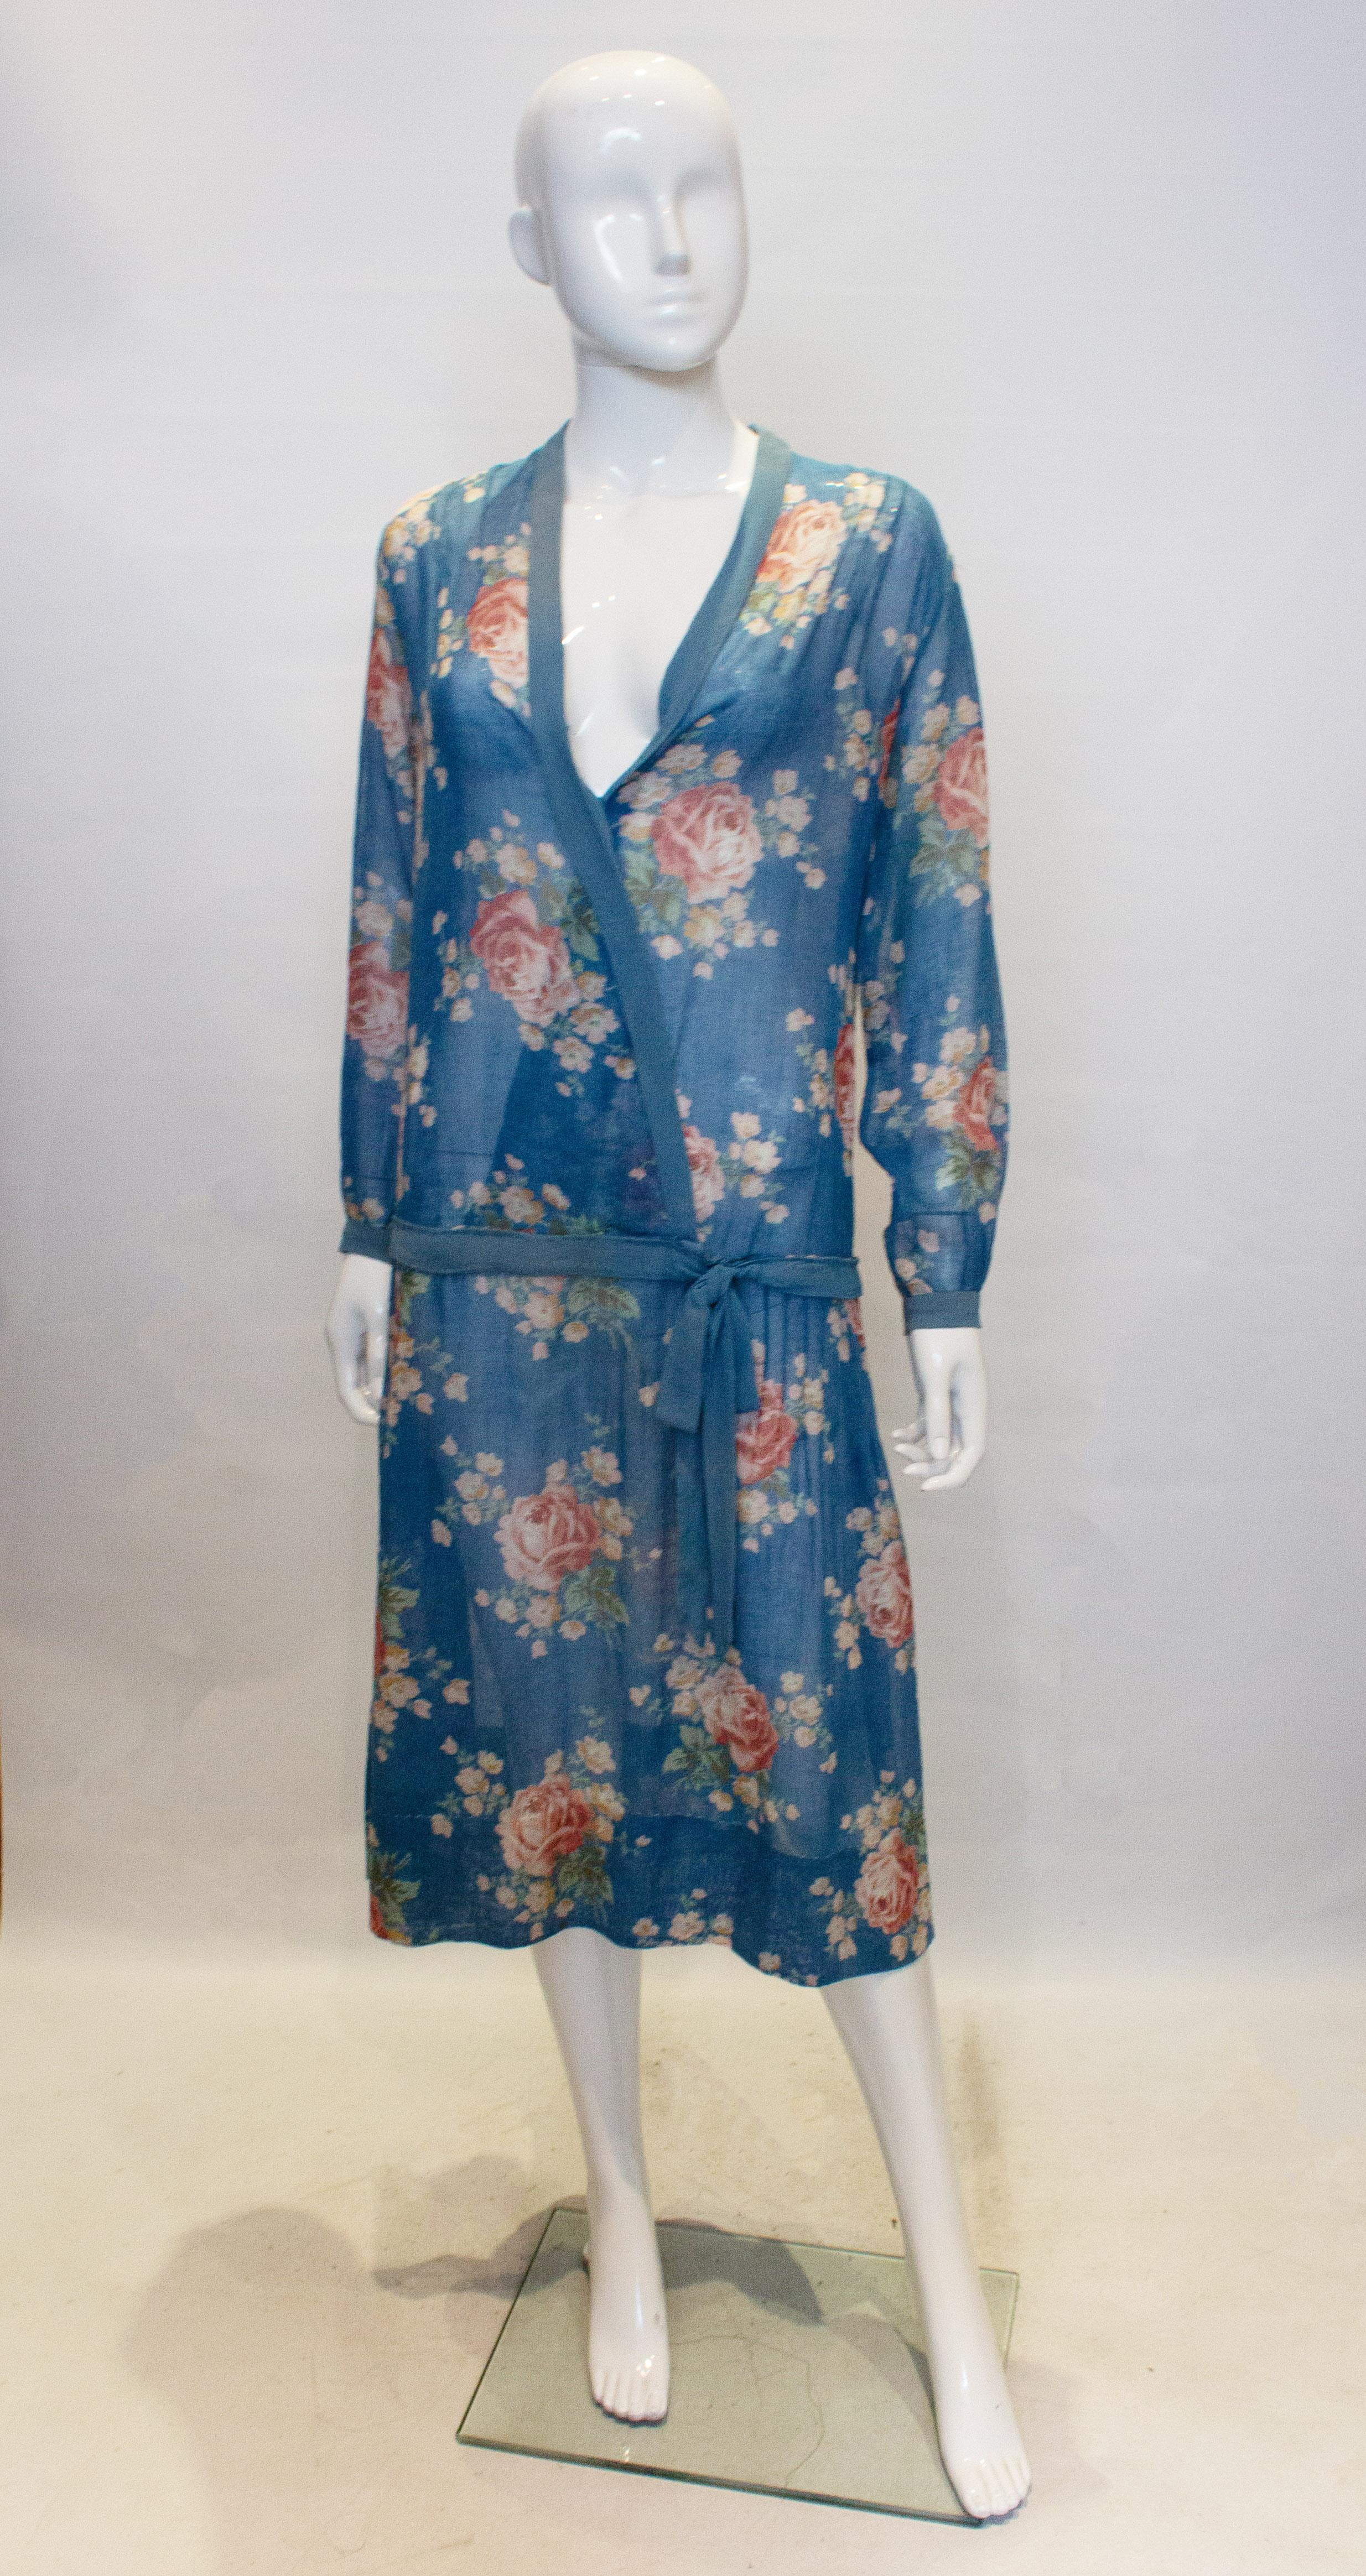 A lovely vintage dress for Summer. In a turquoise blue with a floral print, the dress has a drop waist, pintucks on the shoulders and blue banding along the neckline, cuffs and drop waistline.
Measurements: bust up top 38'', length 42'' plus a 4 ''